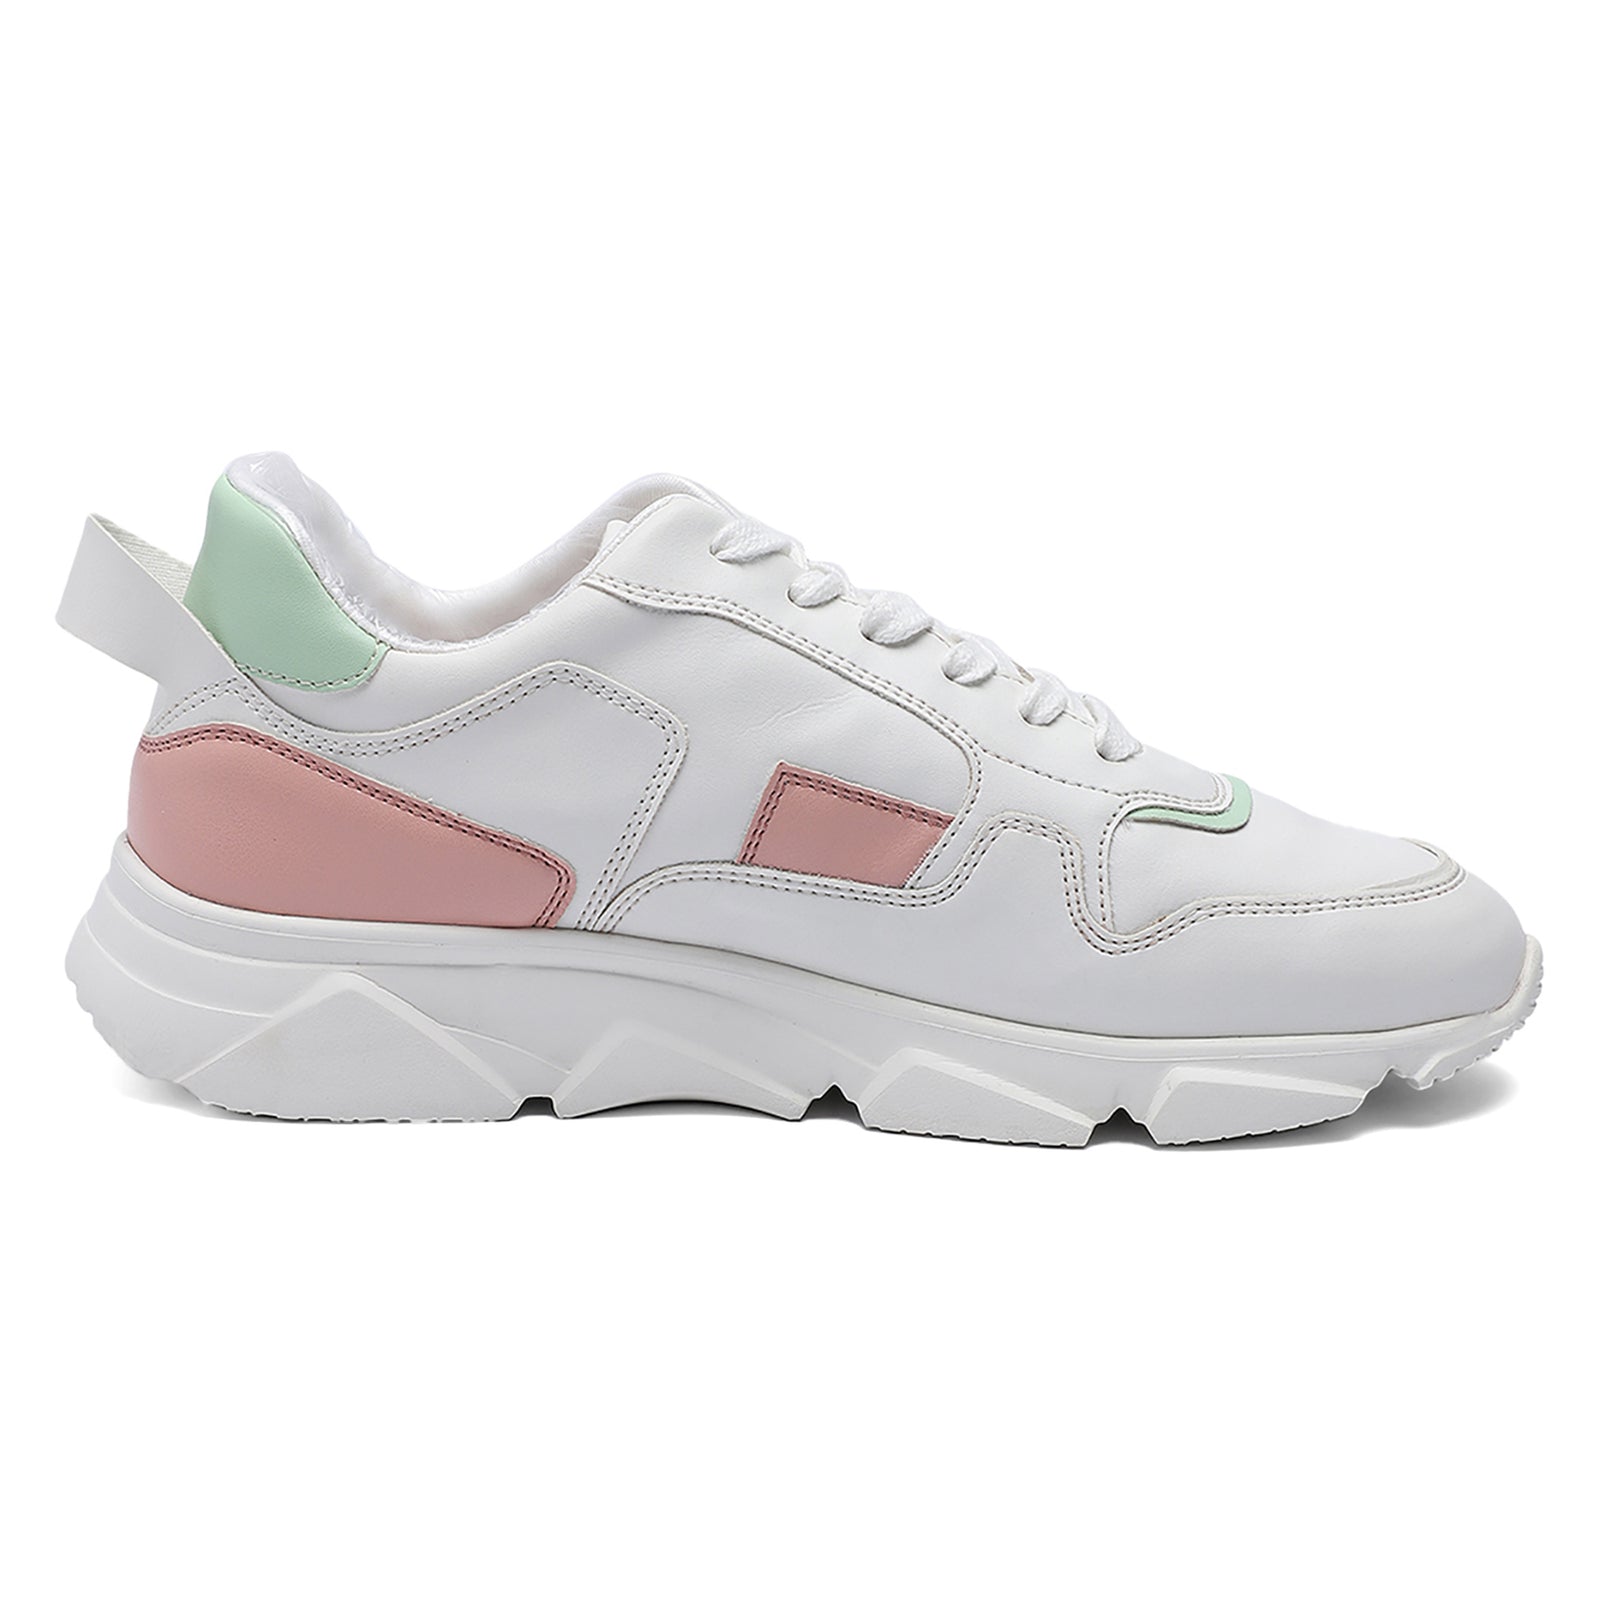 Cotton Candy Womens Sneakers - Pink